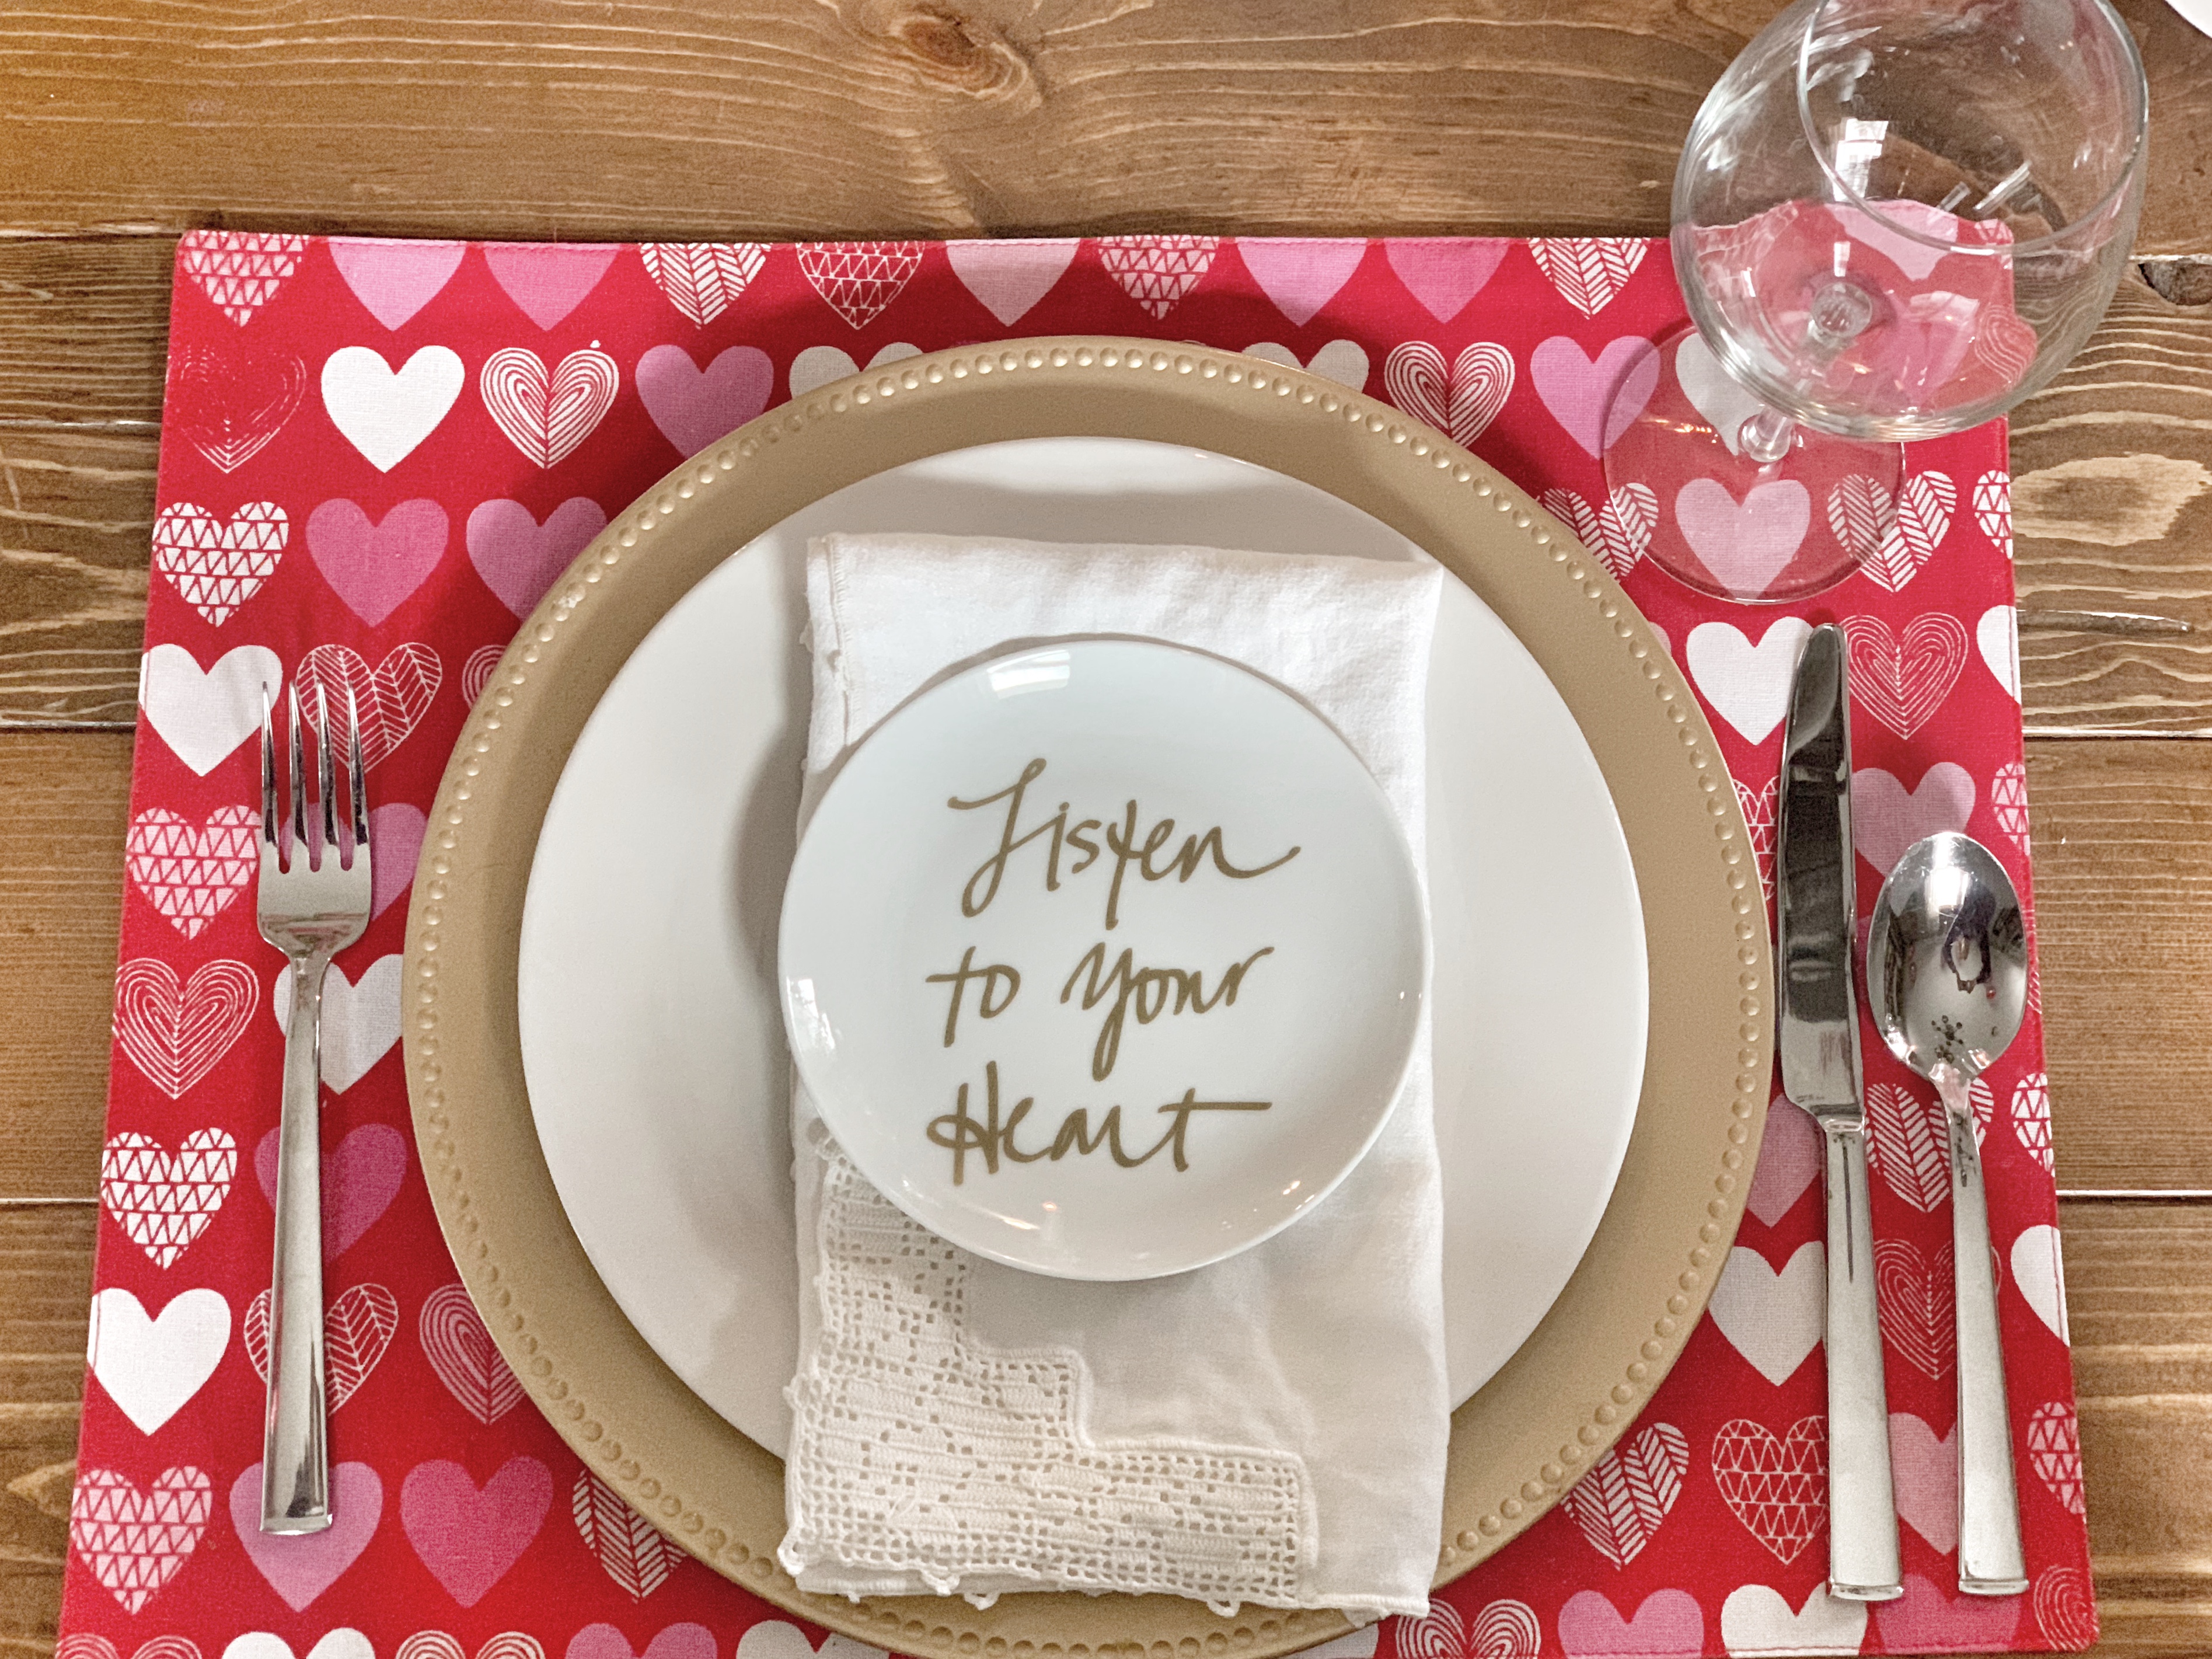 place setting, table decorations